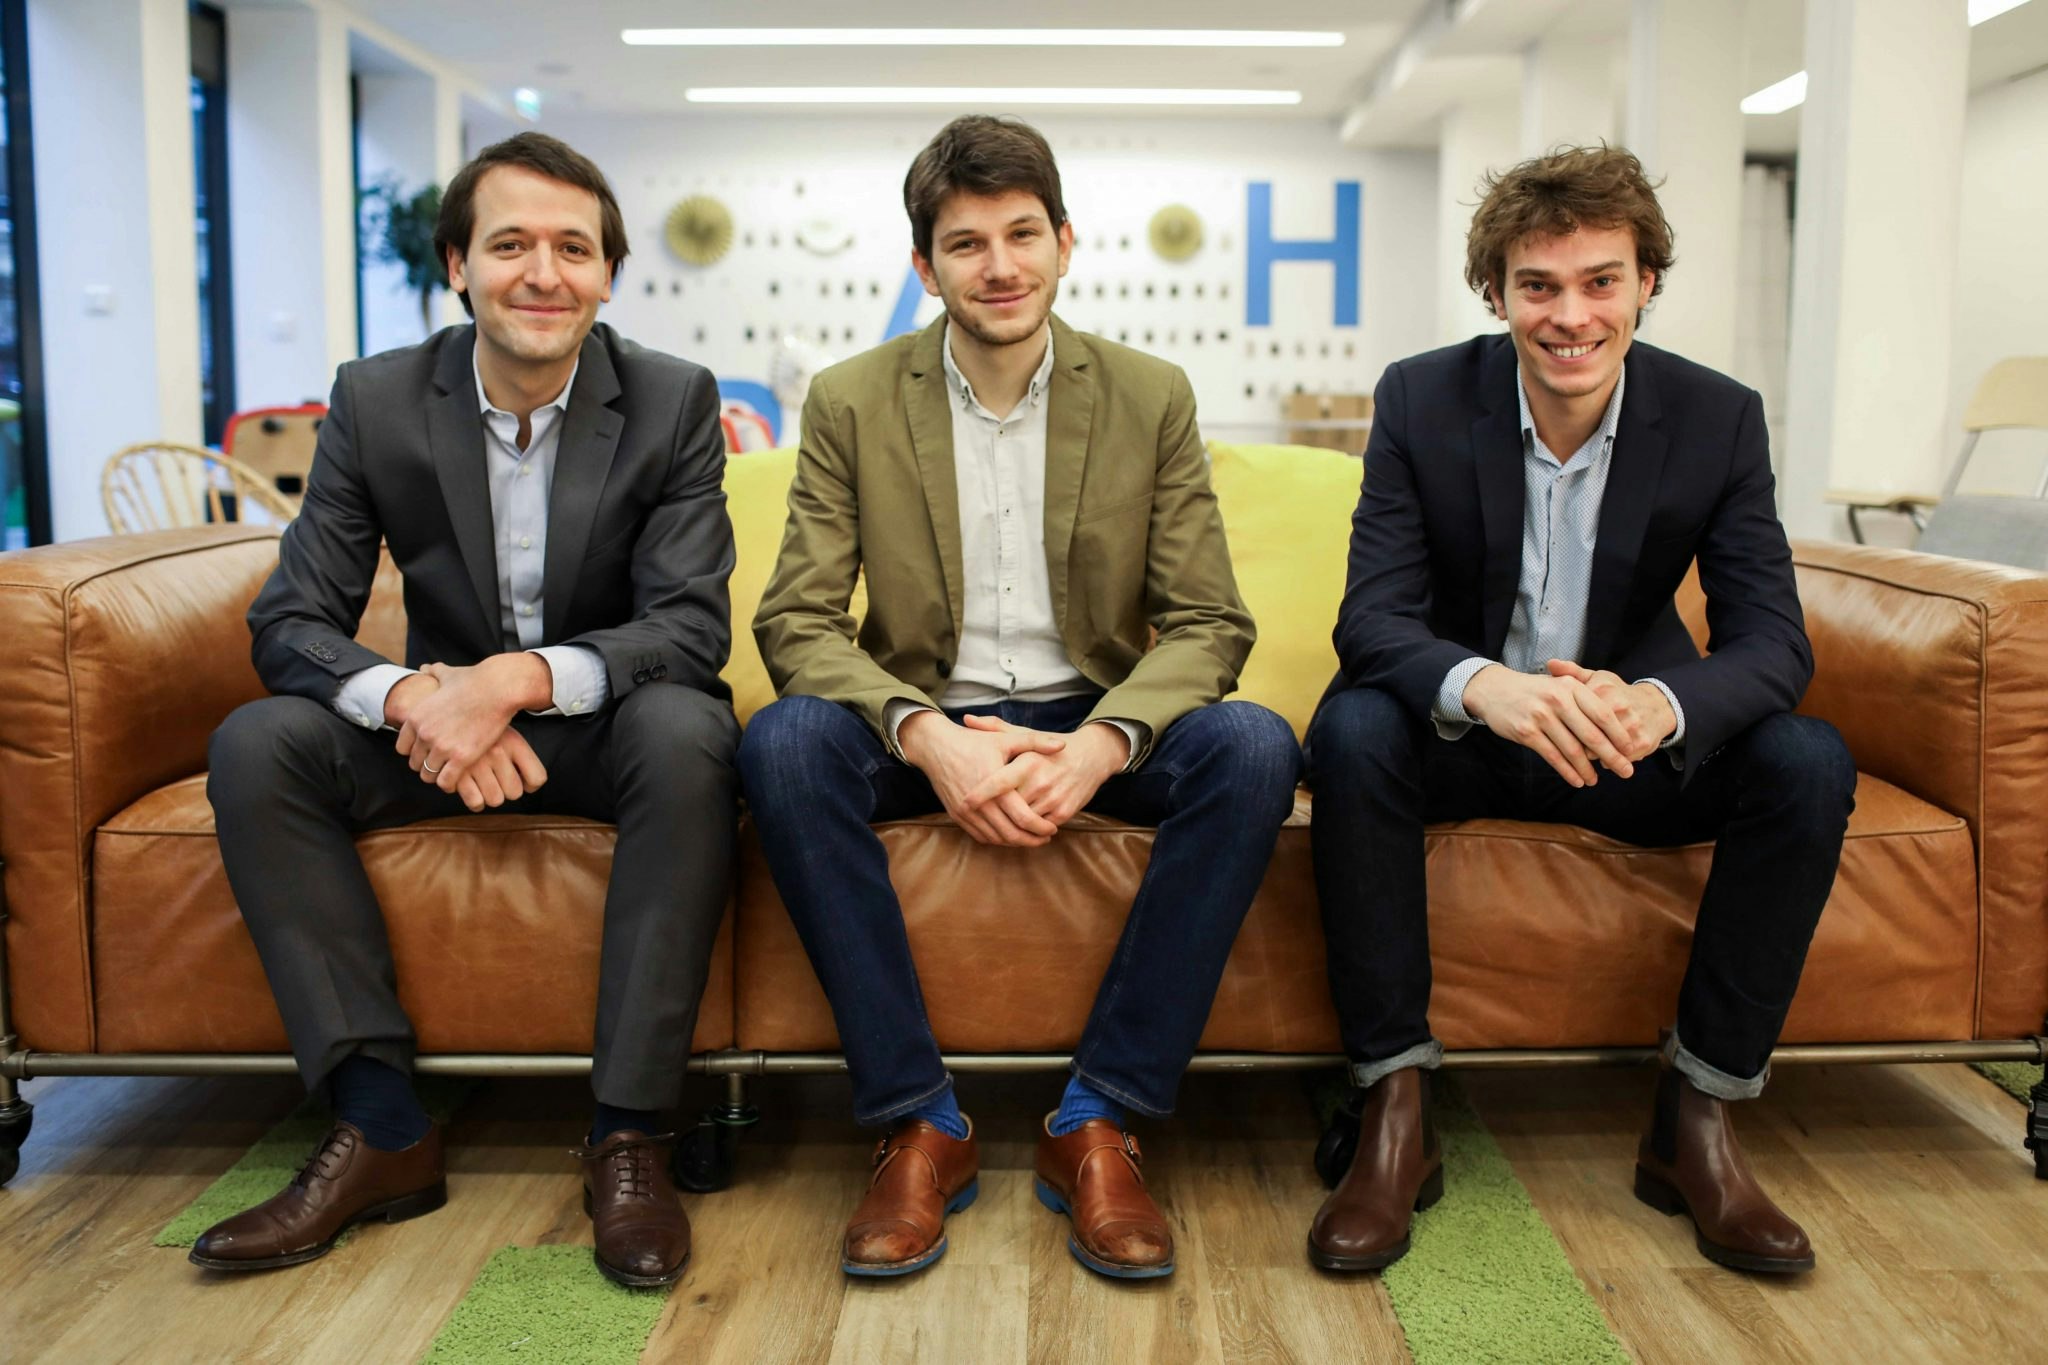 Photo of French doctor booking platform Doctolib's founders: from left, Ivan Schneider, Jessy Bernal and Stanislas Niox-Chateau.